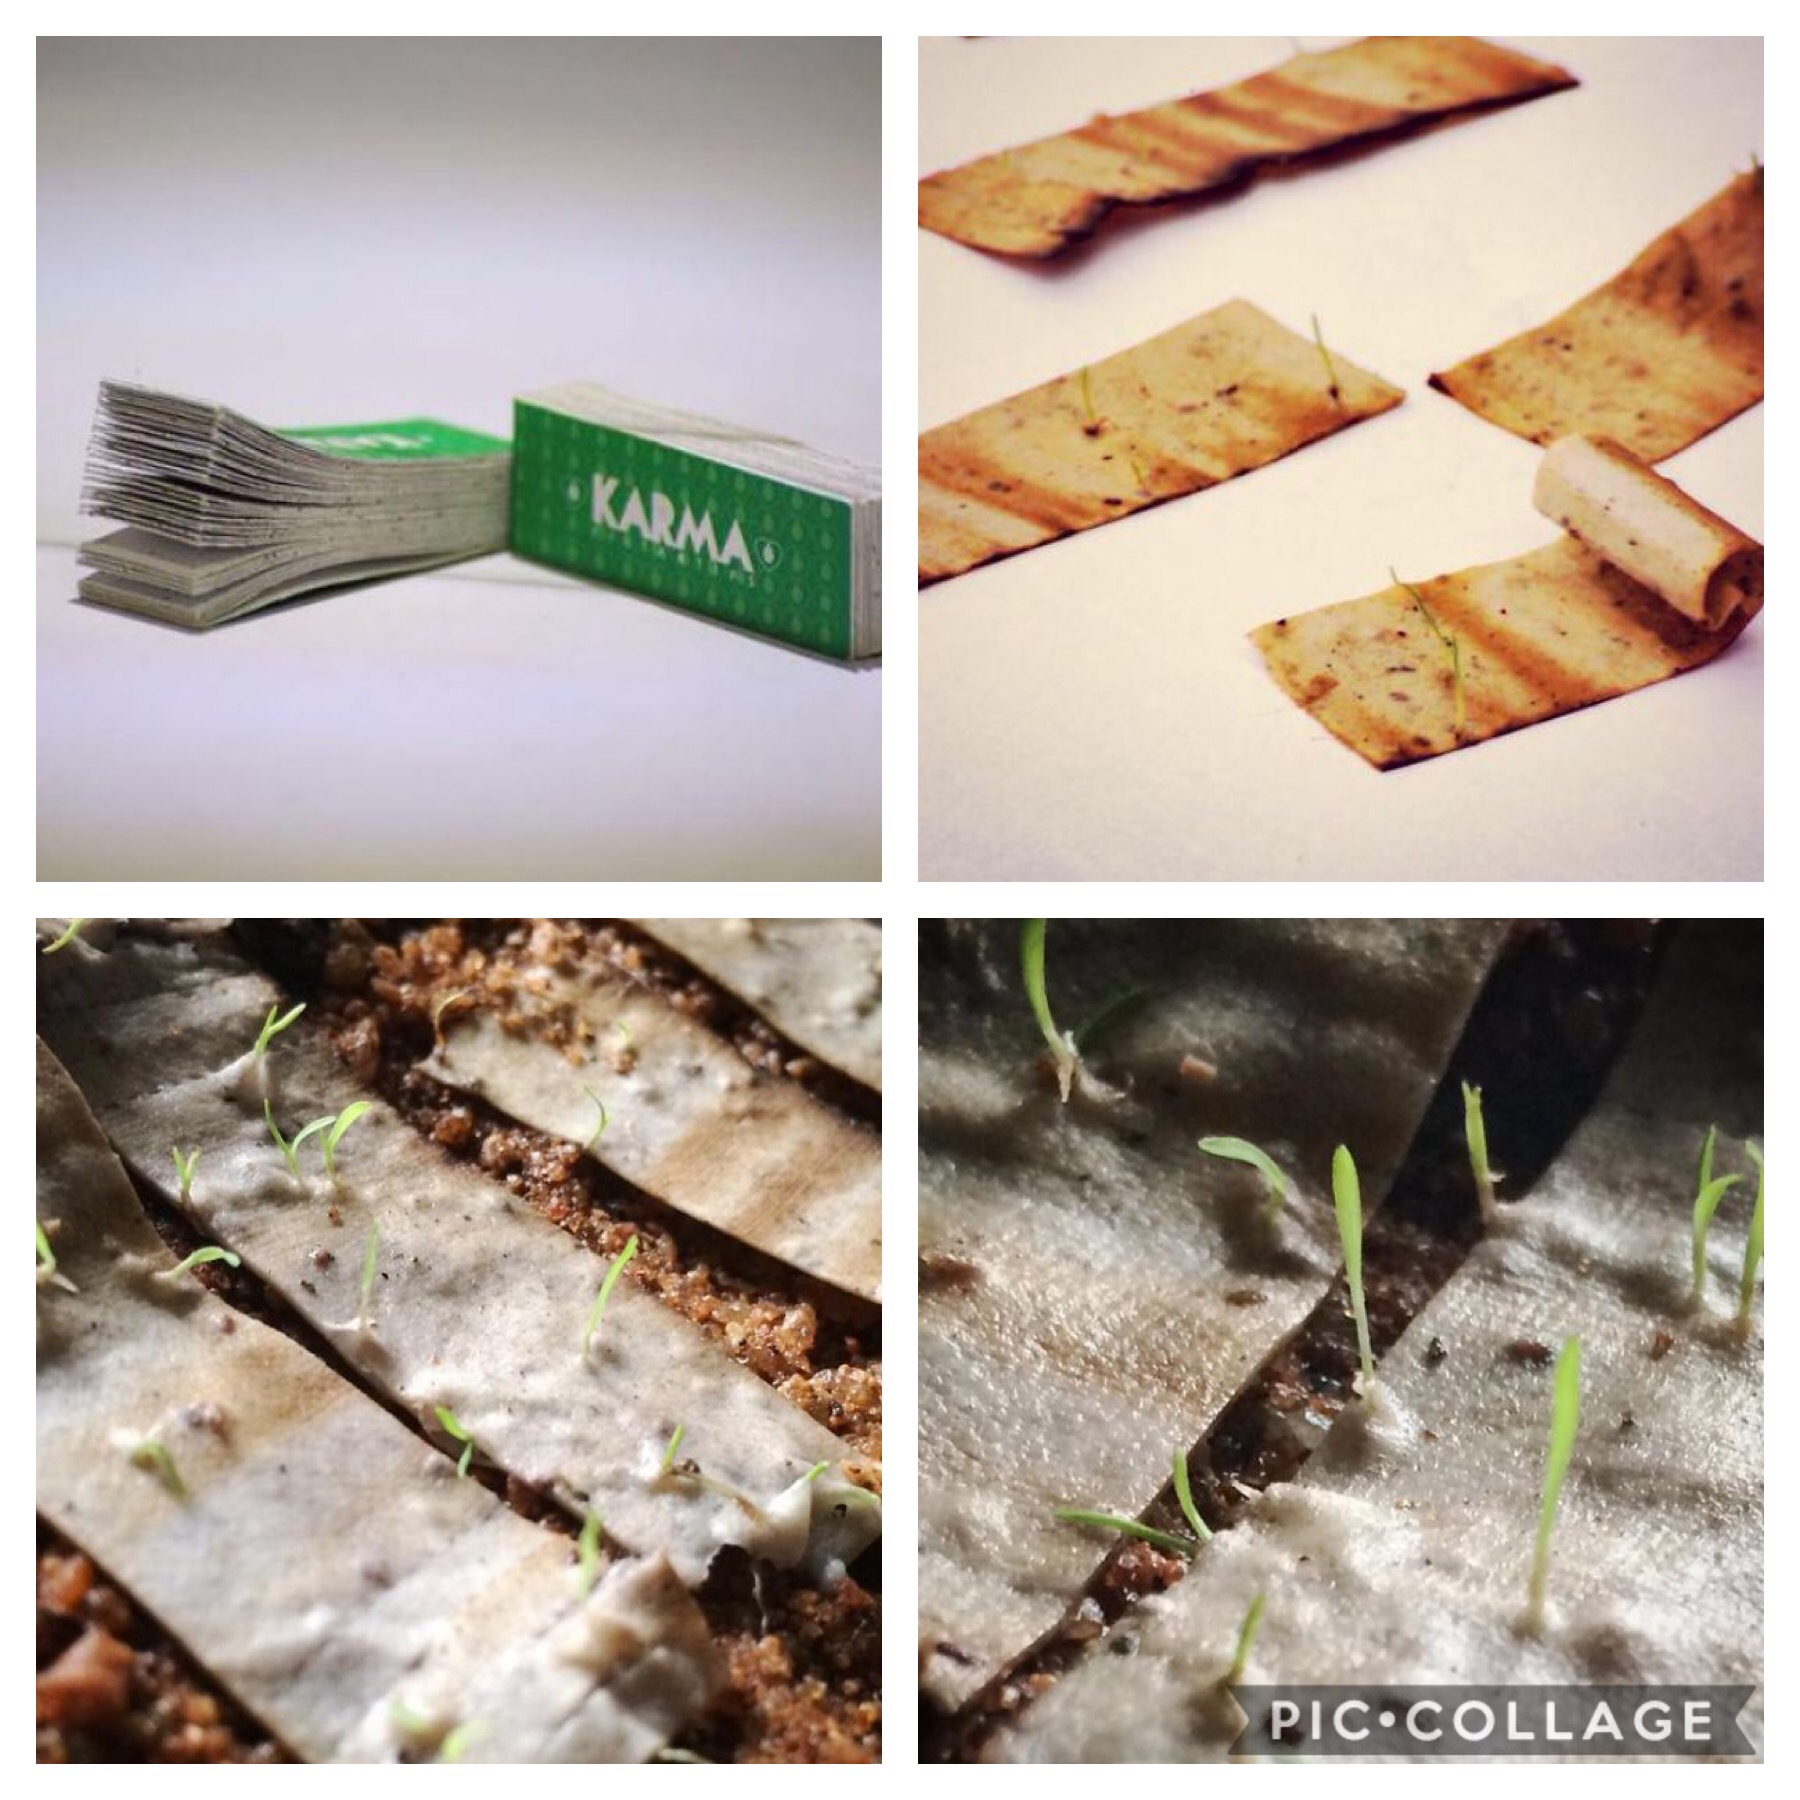 The handmade filters are 100% organic, biodegradable, and non-addictive, and are sold alongside a similarly improved book of rolling papers. When disposed of, the butt degrades in a matter of days and gives root to basil, New Zealand lawn grass, rosemary, or thyme.